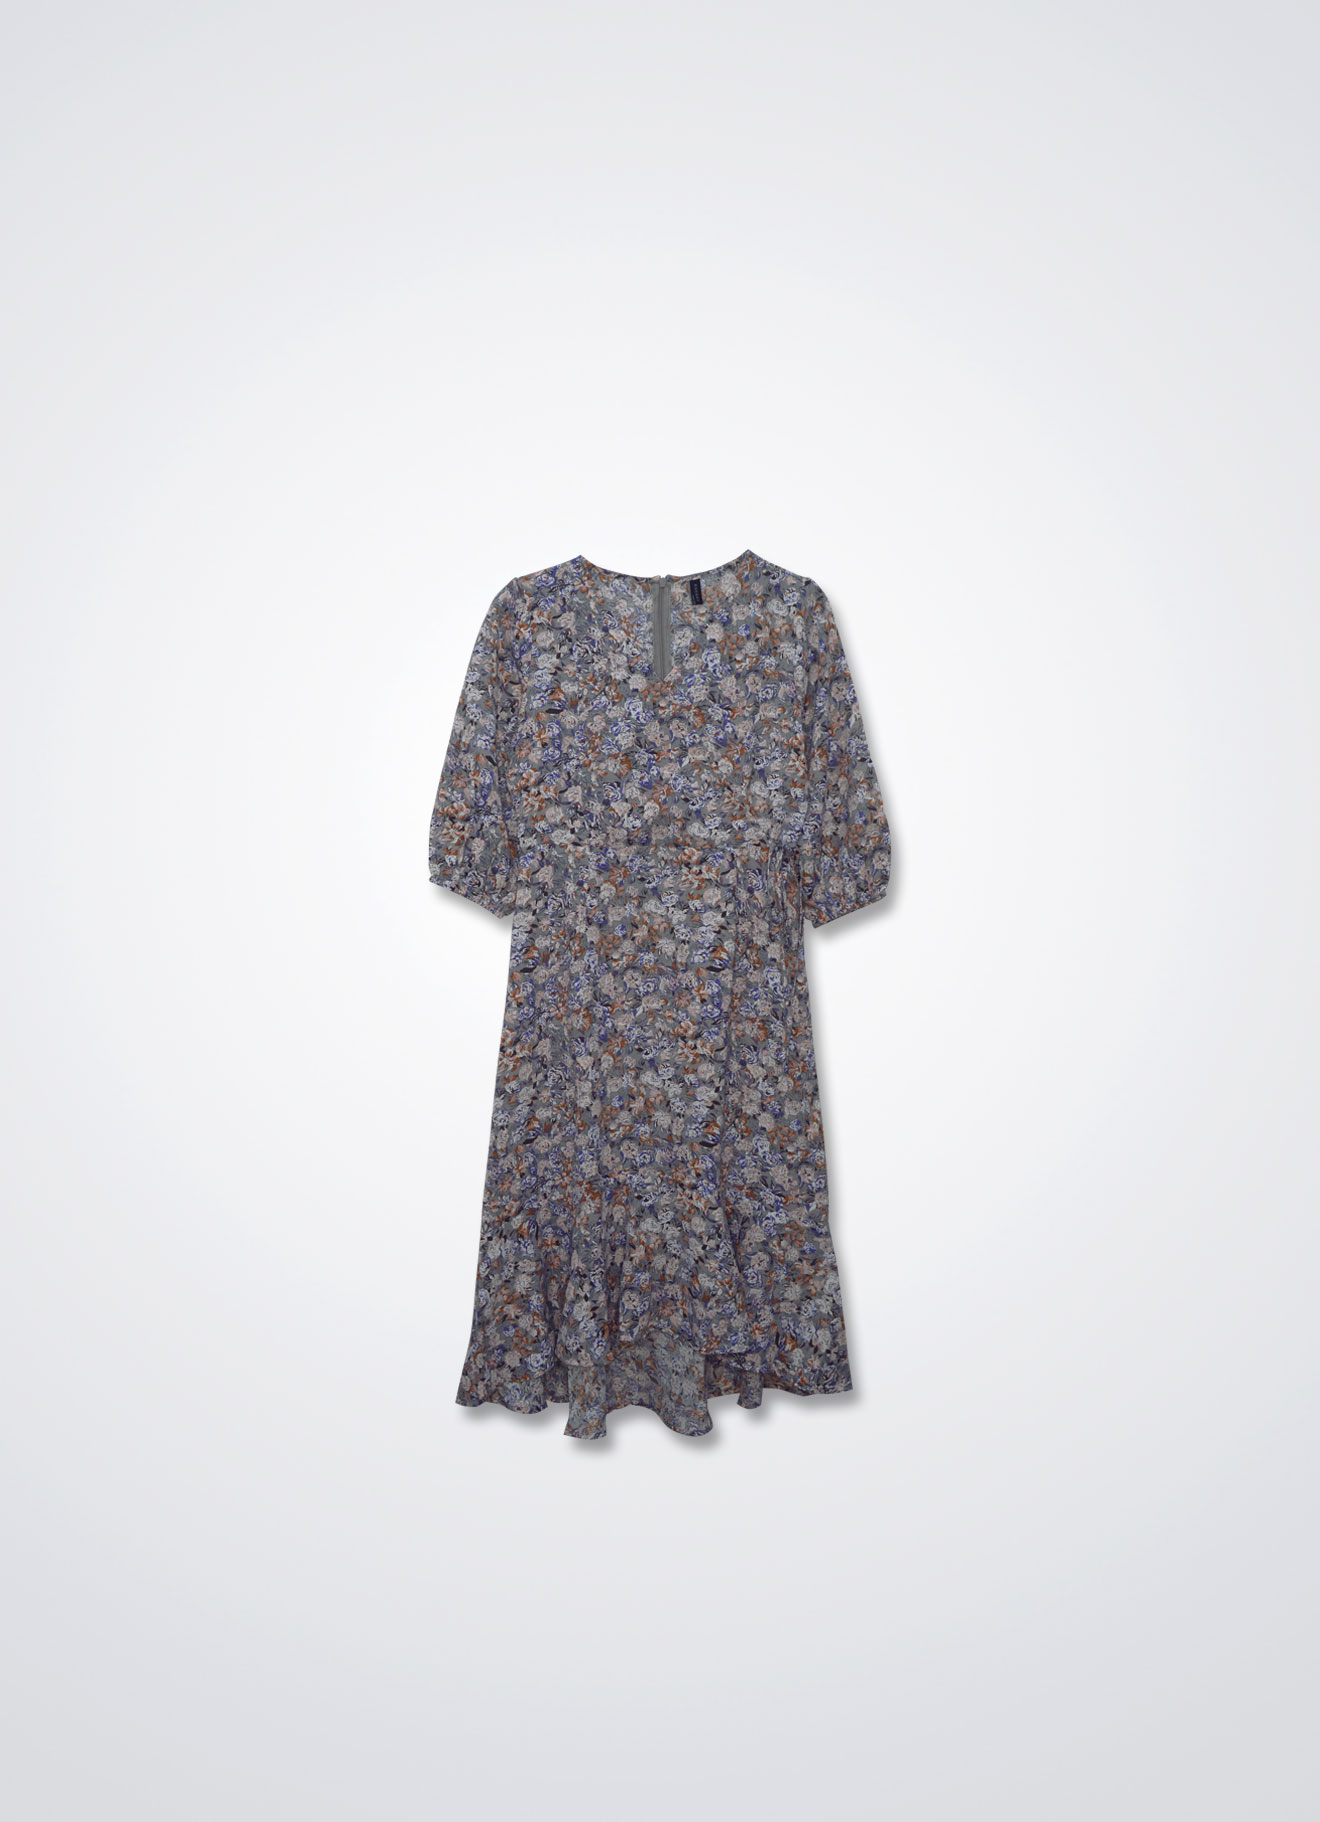 Flint-Gray by Floral Printed Dress